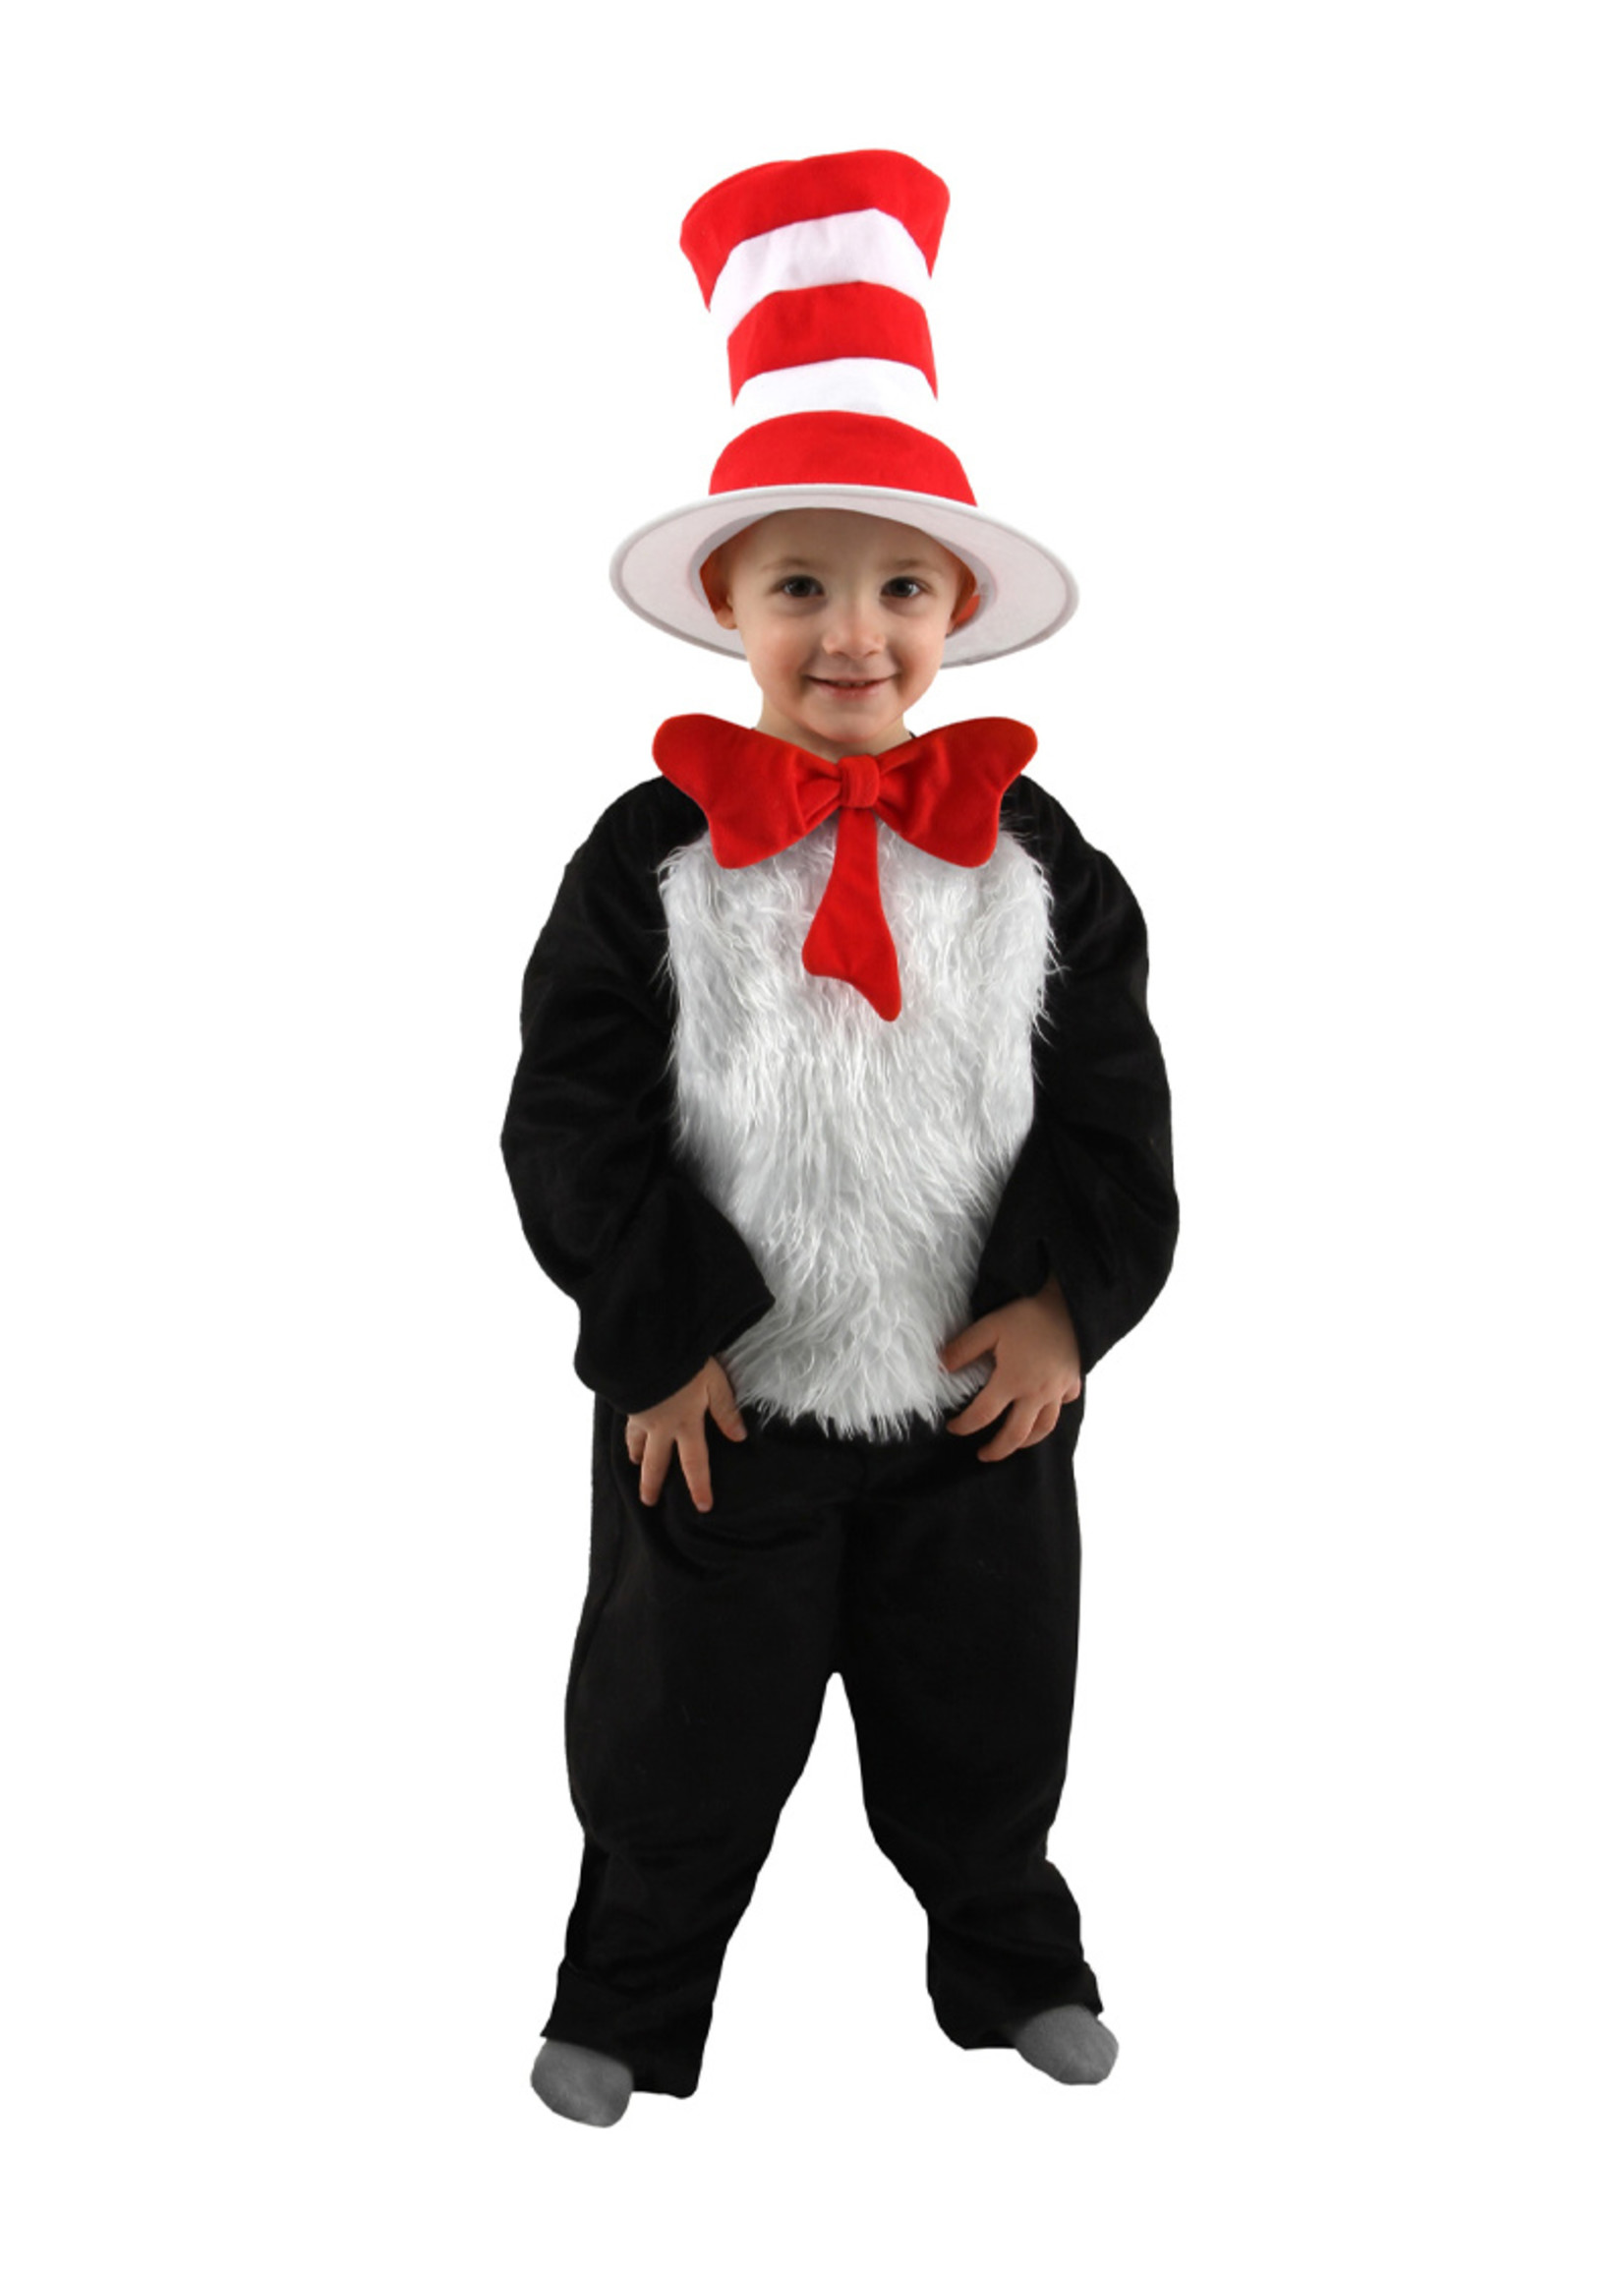 The Cat in the Hat Deluxe Costume - Boys